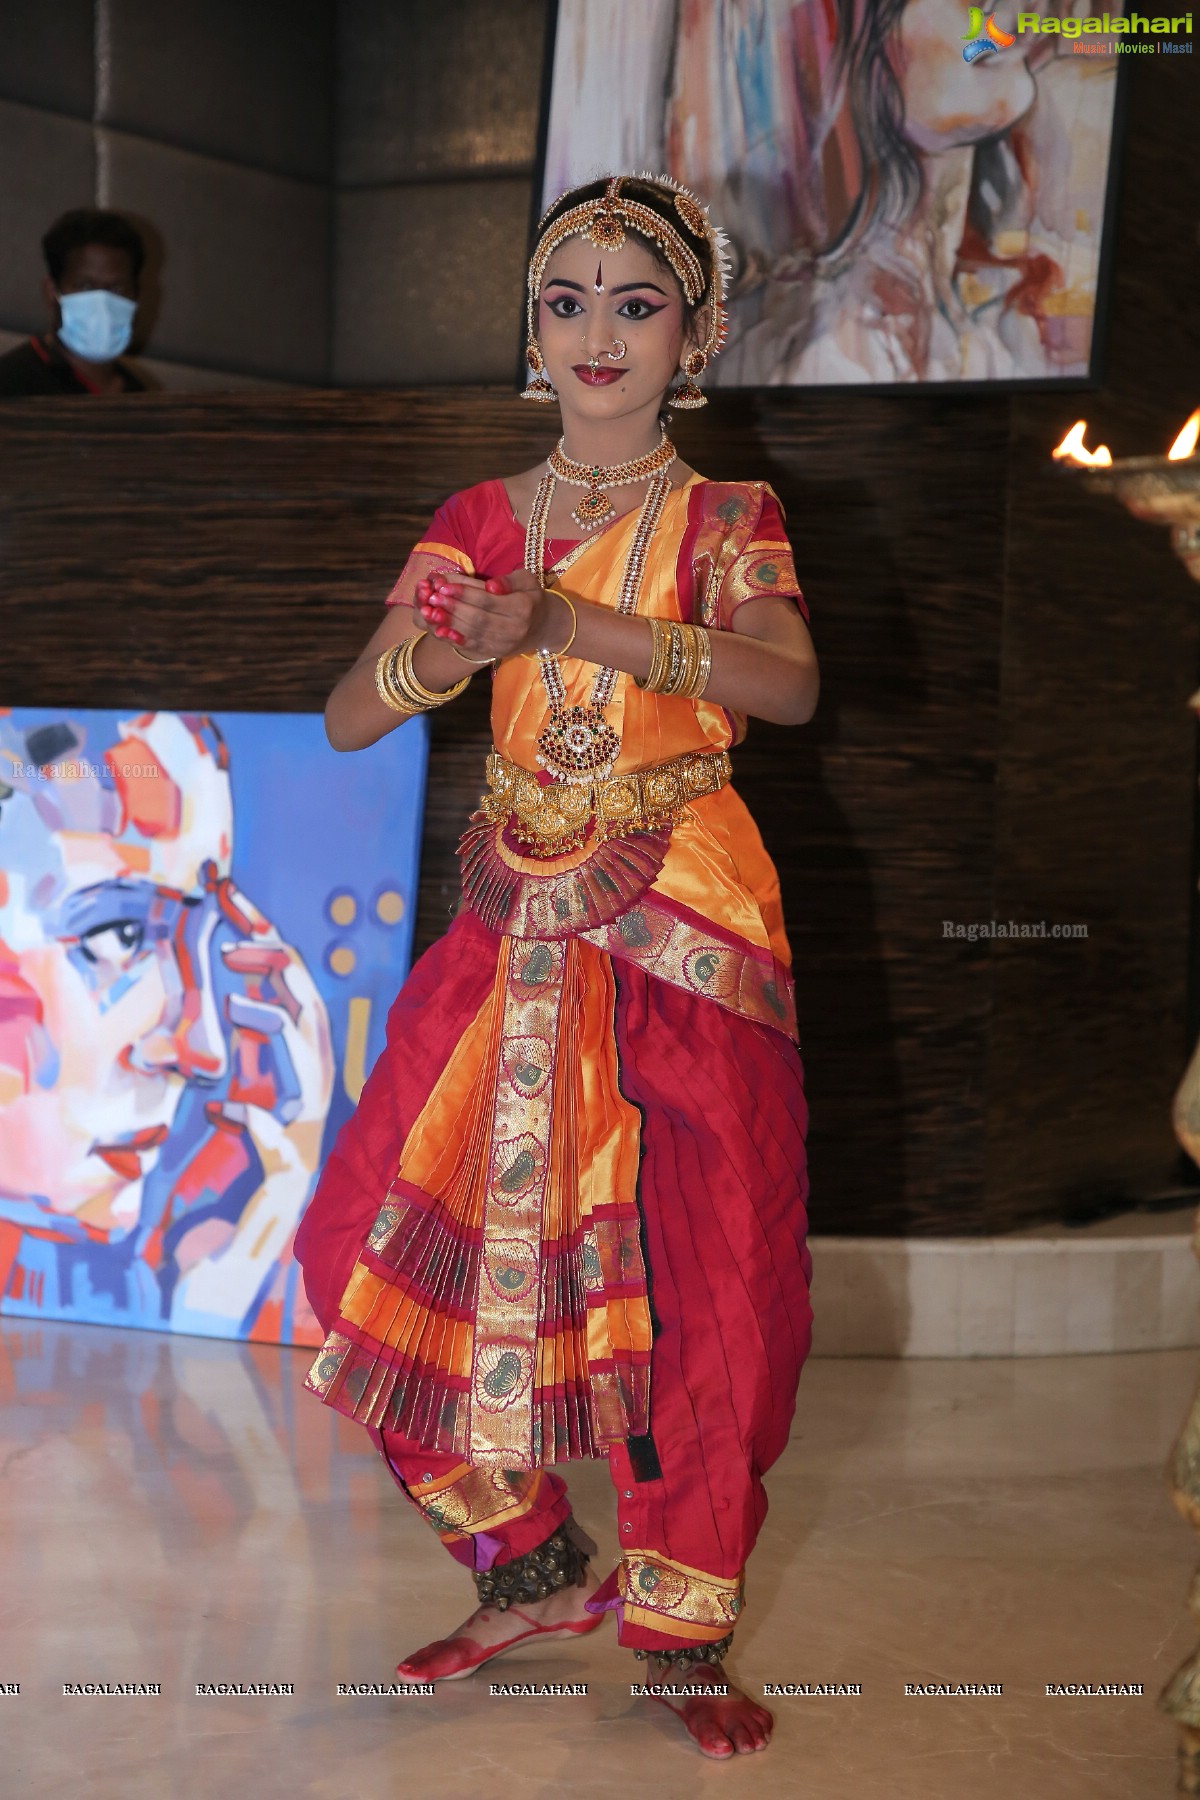 Mother's Day Celebrations - Mother & Child Twinning Fashion Walk at Visual Art Gallery 